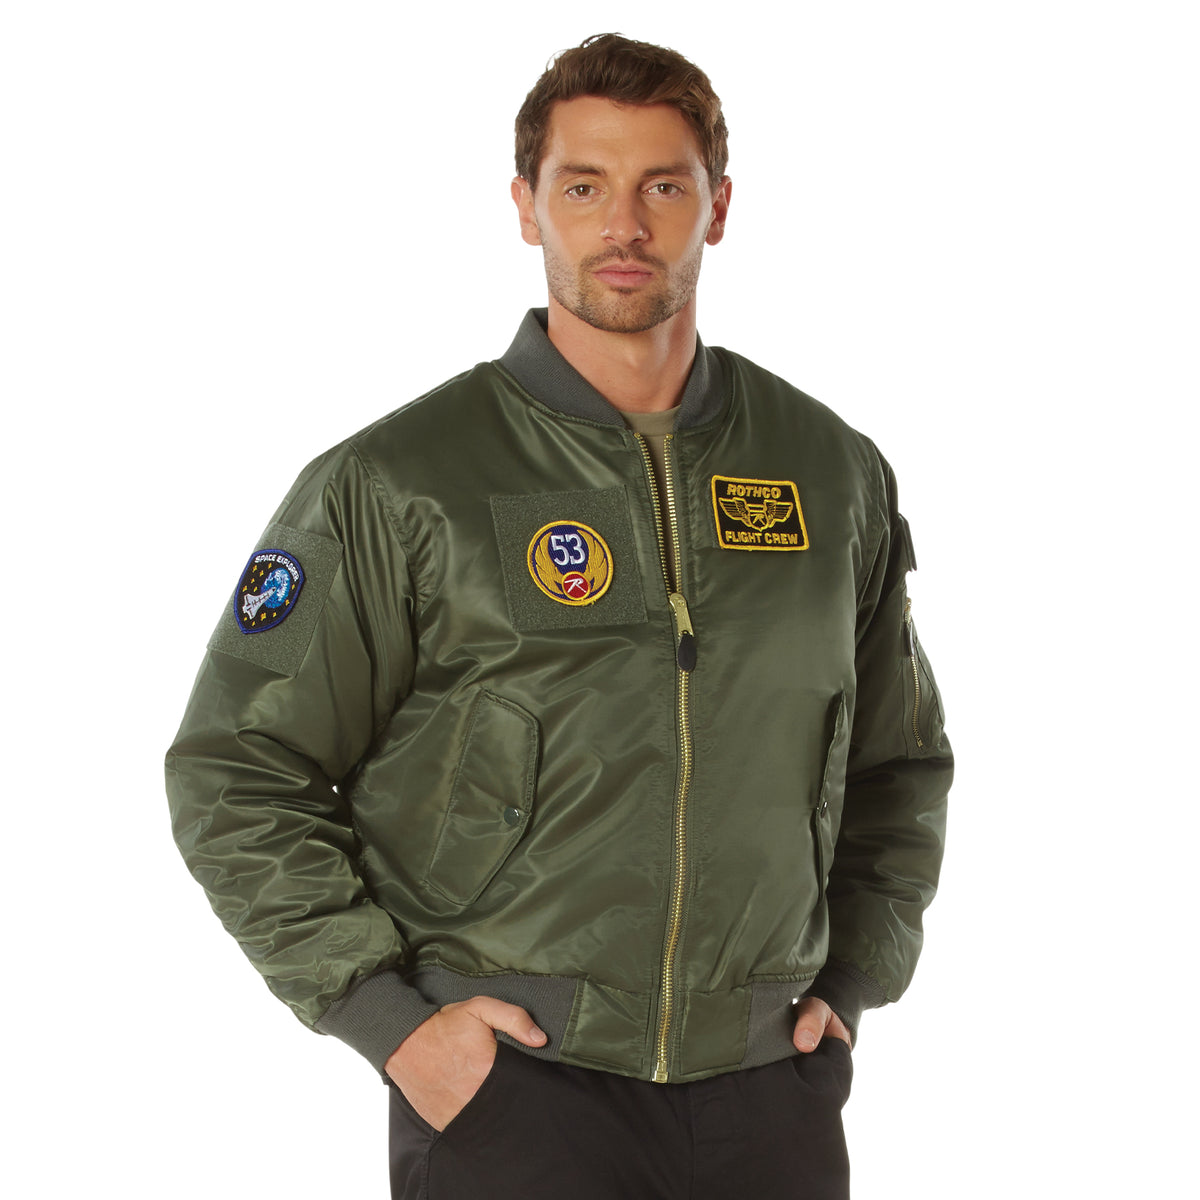 MA-1 Flight Sage Jacket - Green with Patches